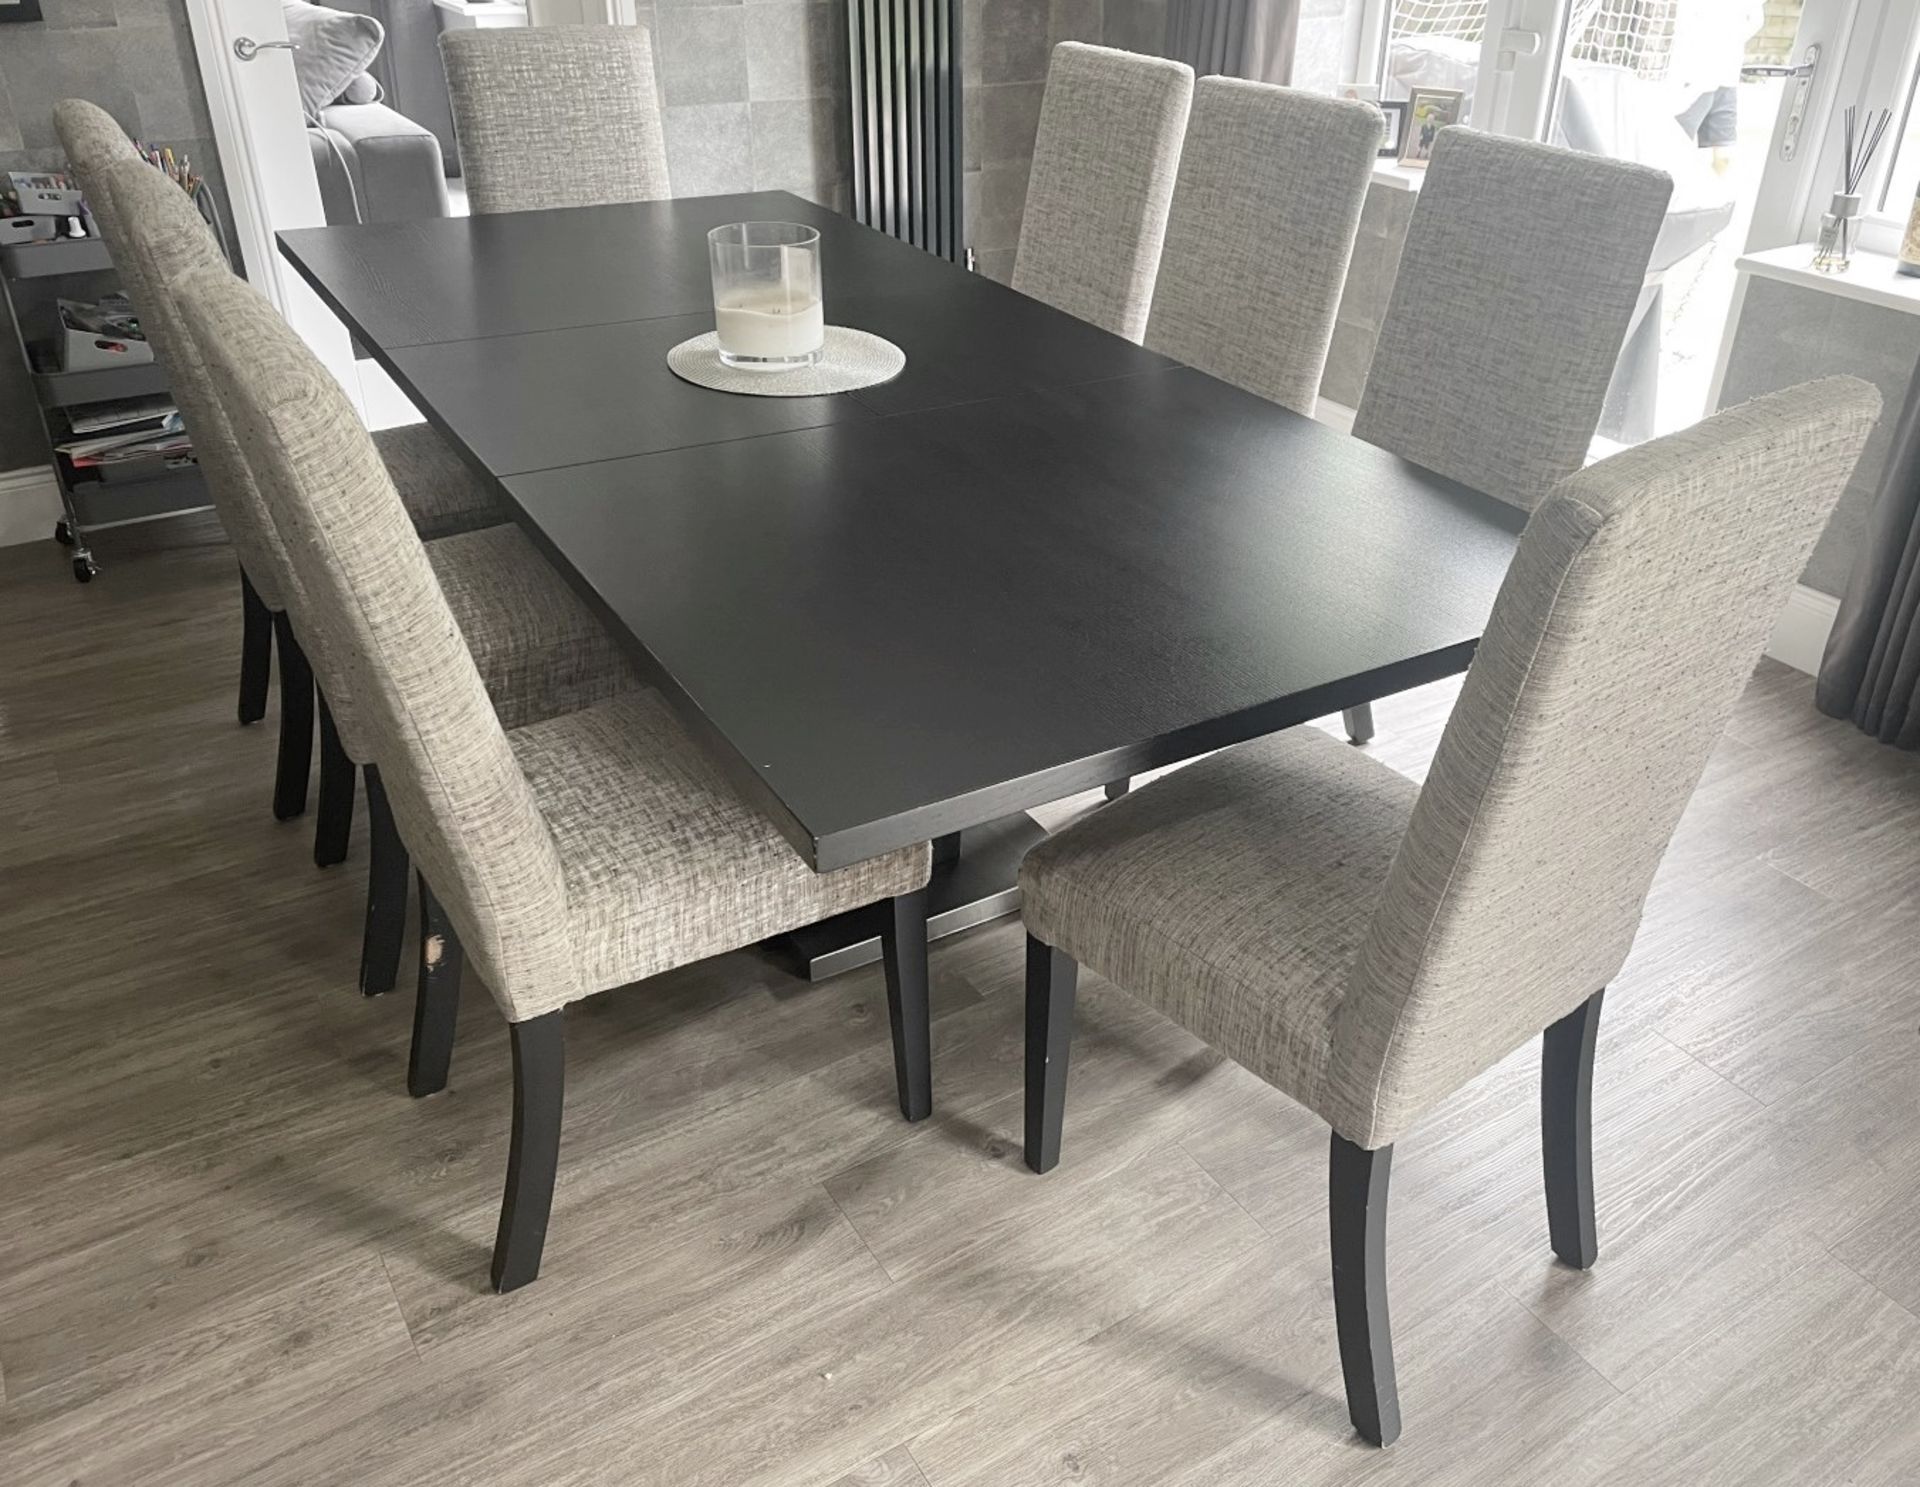 1 x Extending 2.4-Metre Dining Table With 8 x Upholstered Chairs, And Sideboard Unit - NO VAT - Image 7 of 26